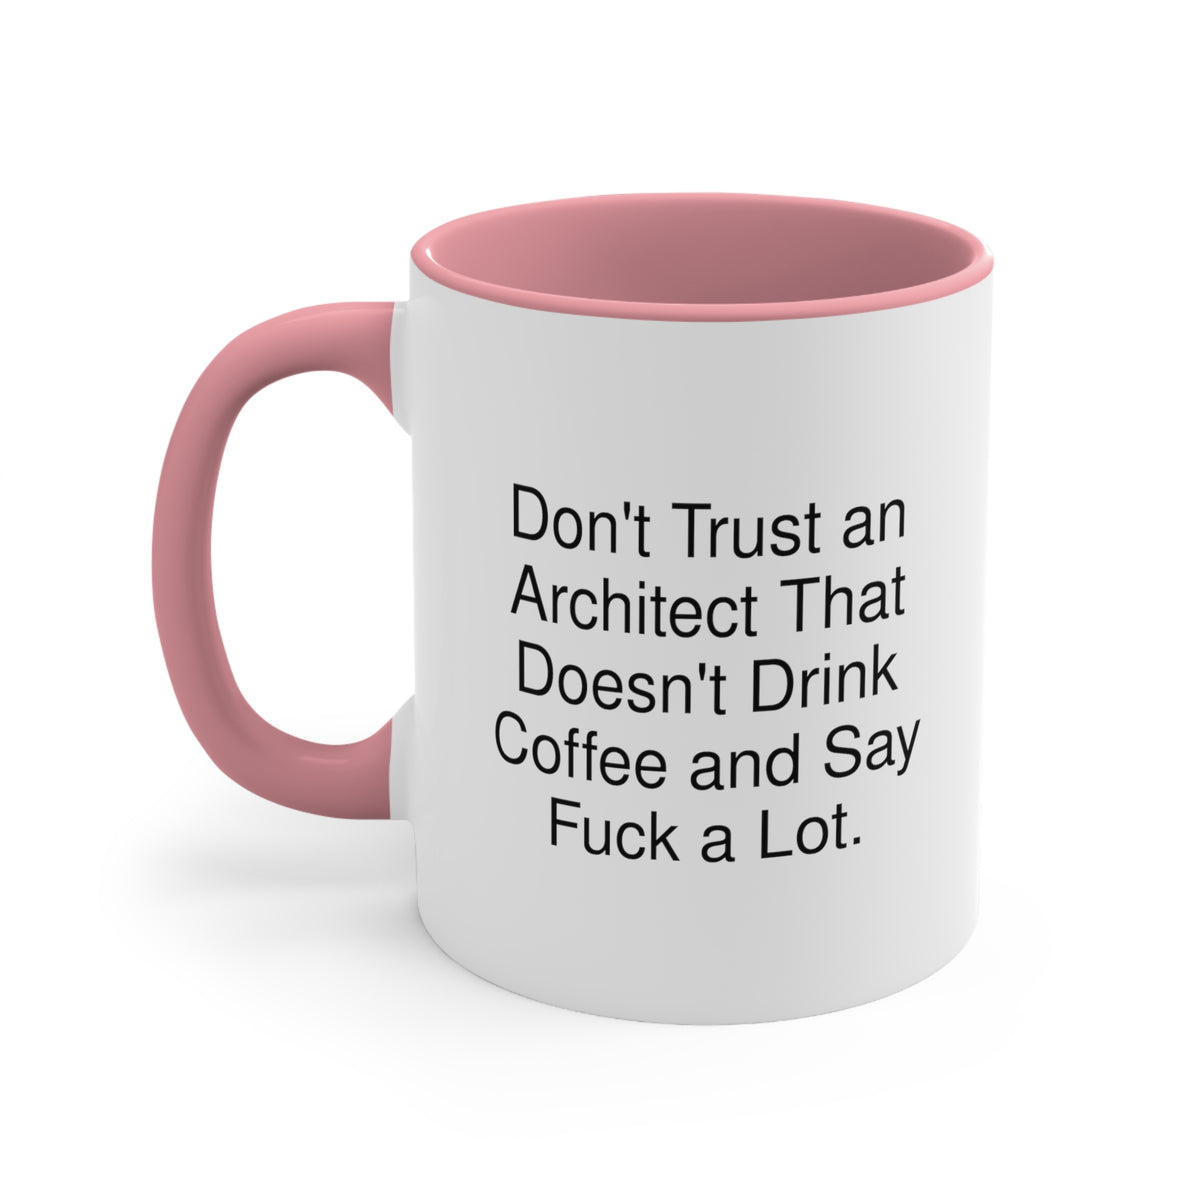 Don't Trust an Architect That Doesn't Drink. Architect Two Tone 11oz Mug, Funny Architect Gifts, Cup For Coworkers from Friends, Architectural models, Building blocks, Construction toys, Designer